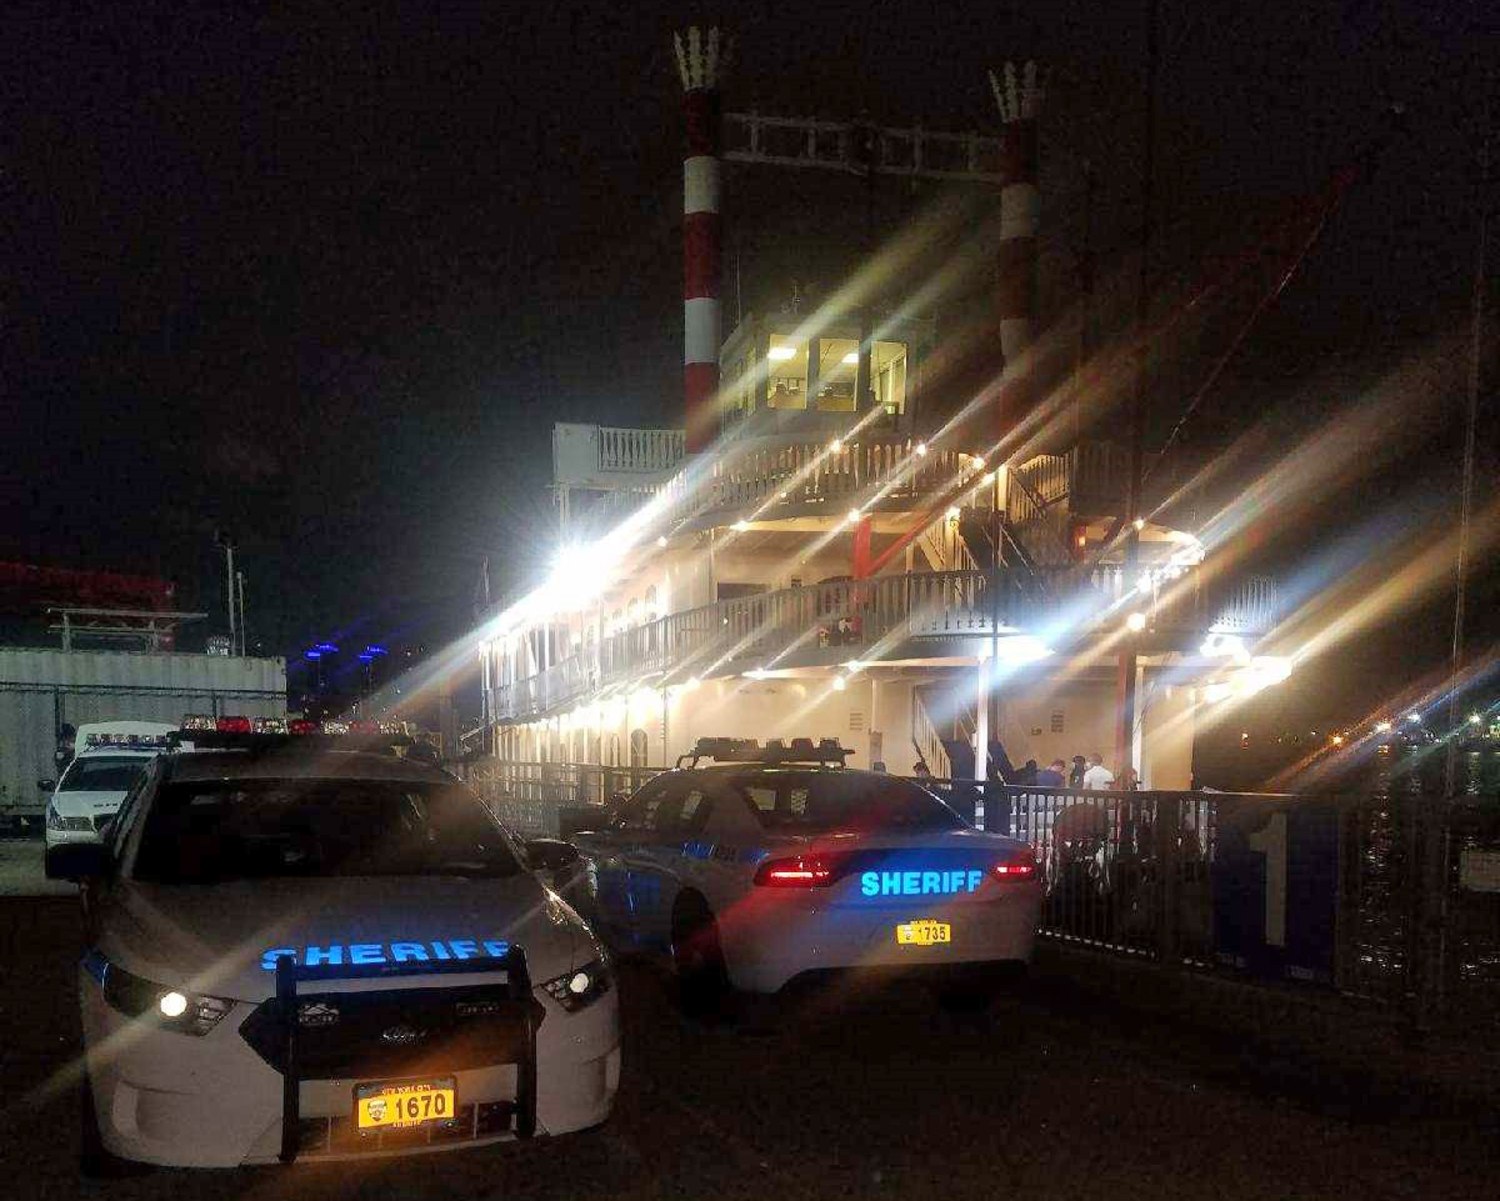 NYC party ship owners arrested, charged with breaking coronavirus orders on booze cruise